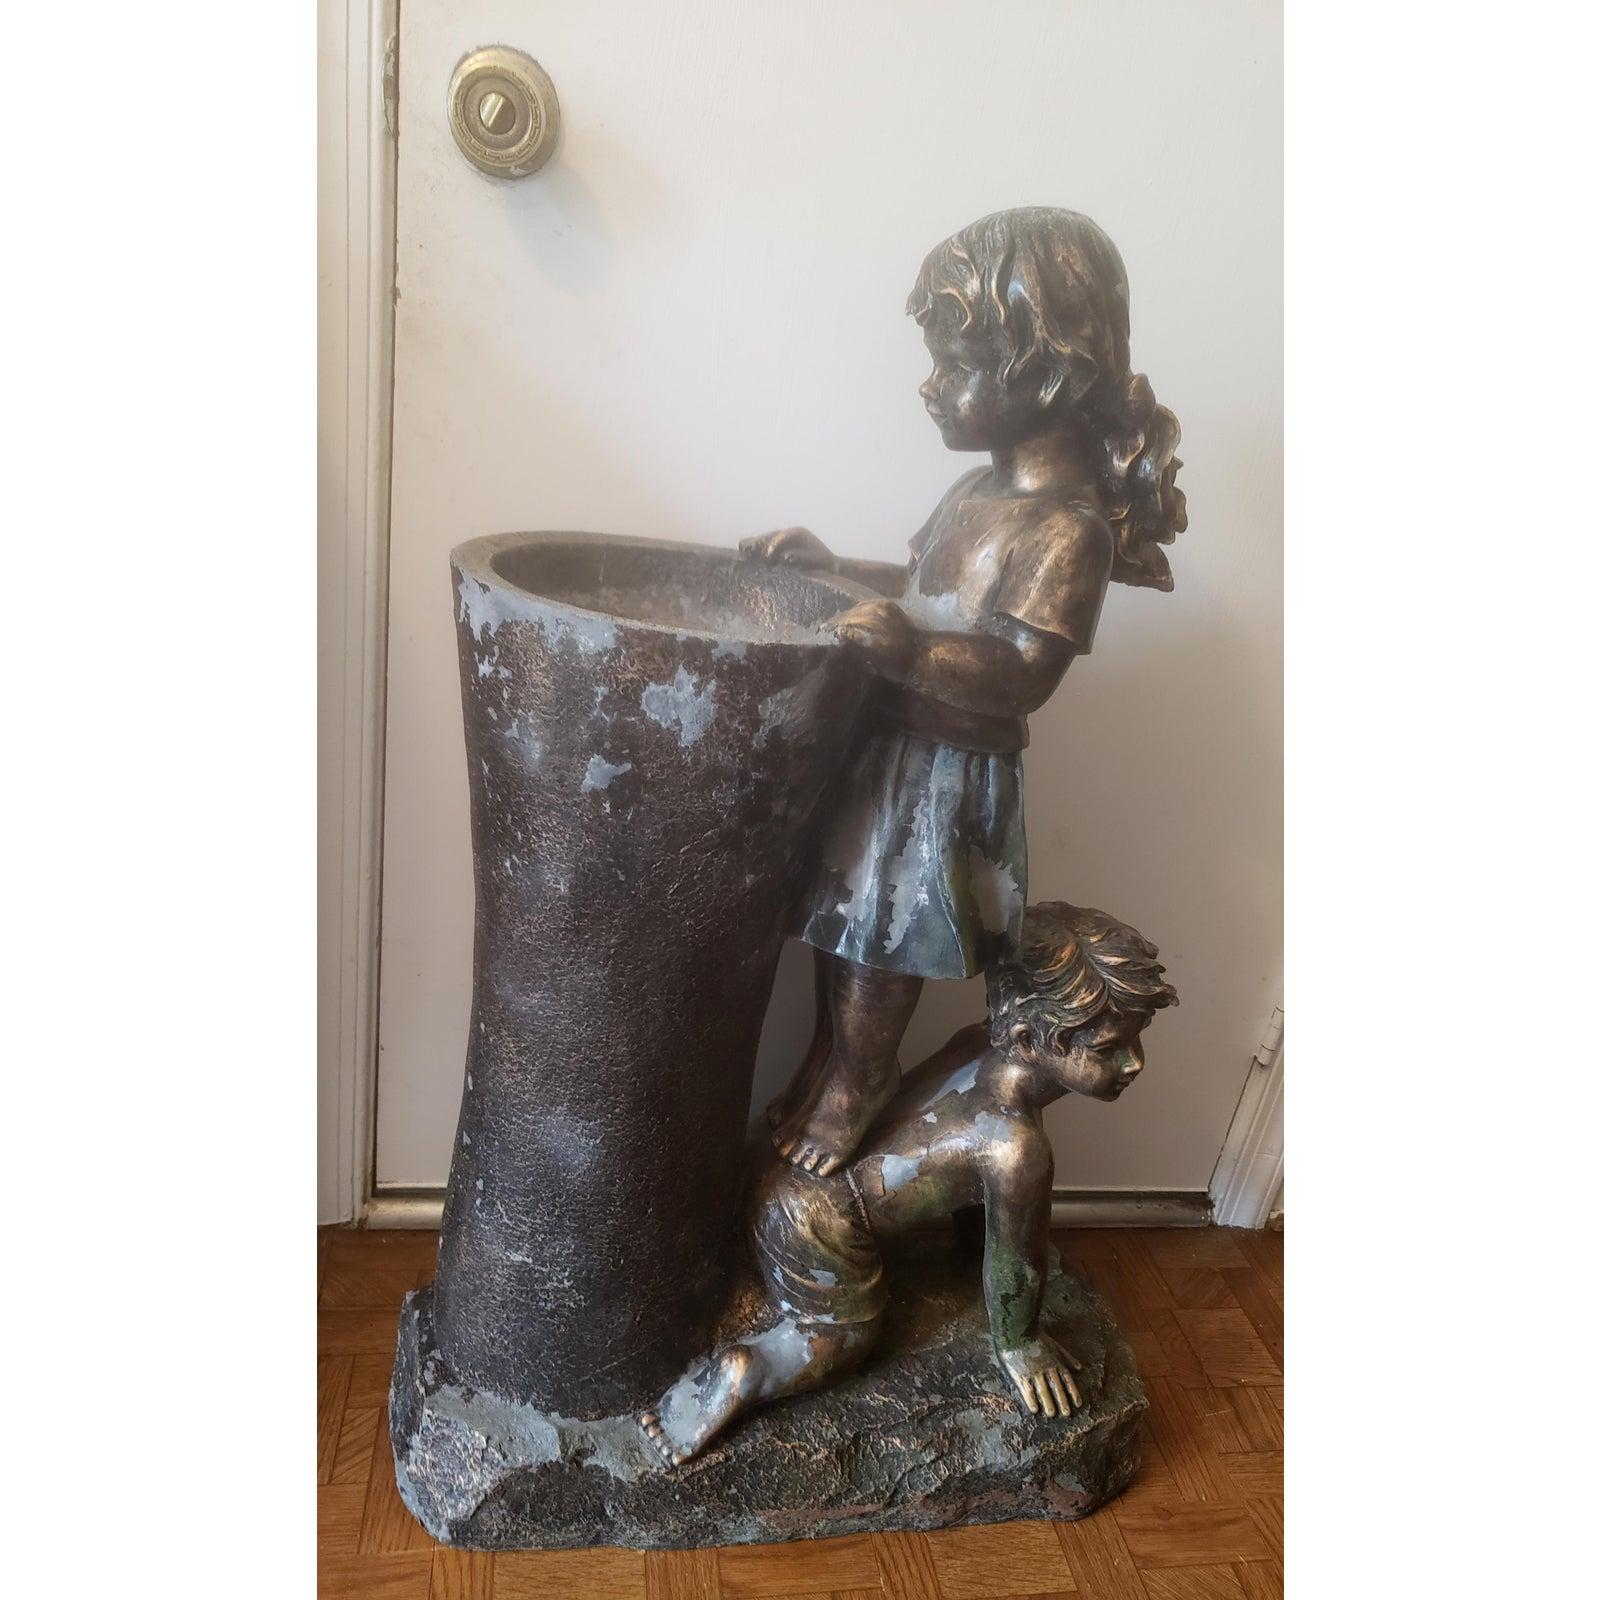 Vintage boy and girl water fountain statue.
Boy & girl water fountain statue.
Made out of resin and fiberglass materiel with bronze finish. Some finish loss as visible on picture due to age. No structural damage. 
Dimensions:24? in width x 10? in